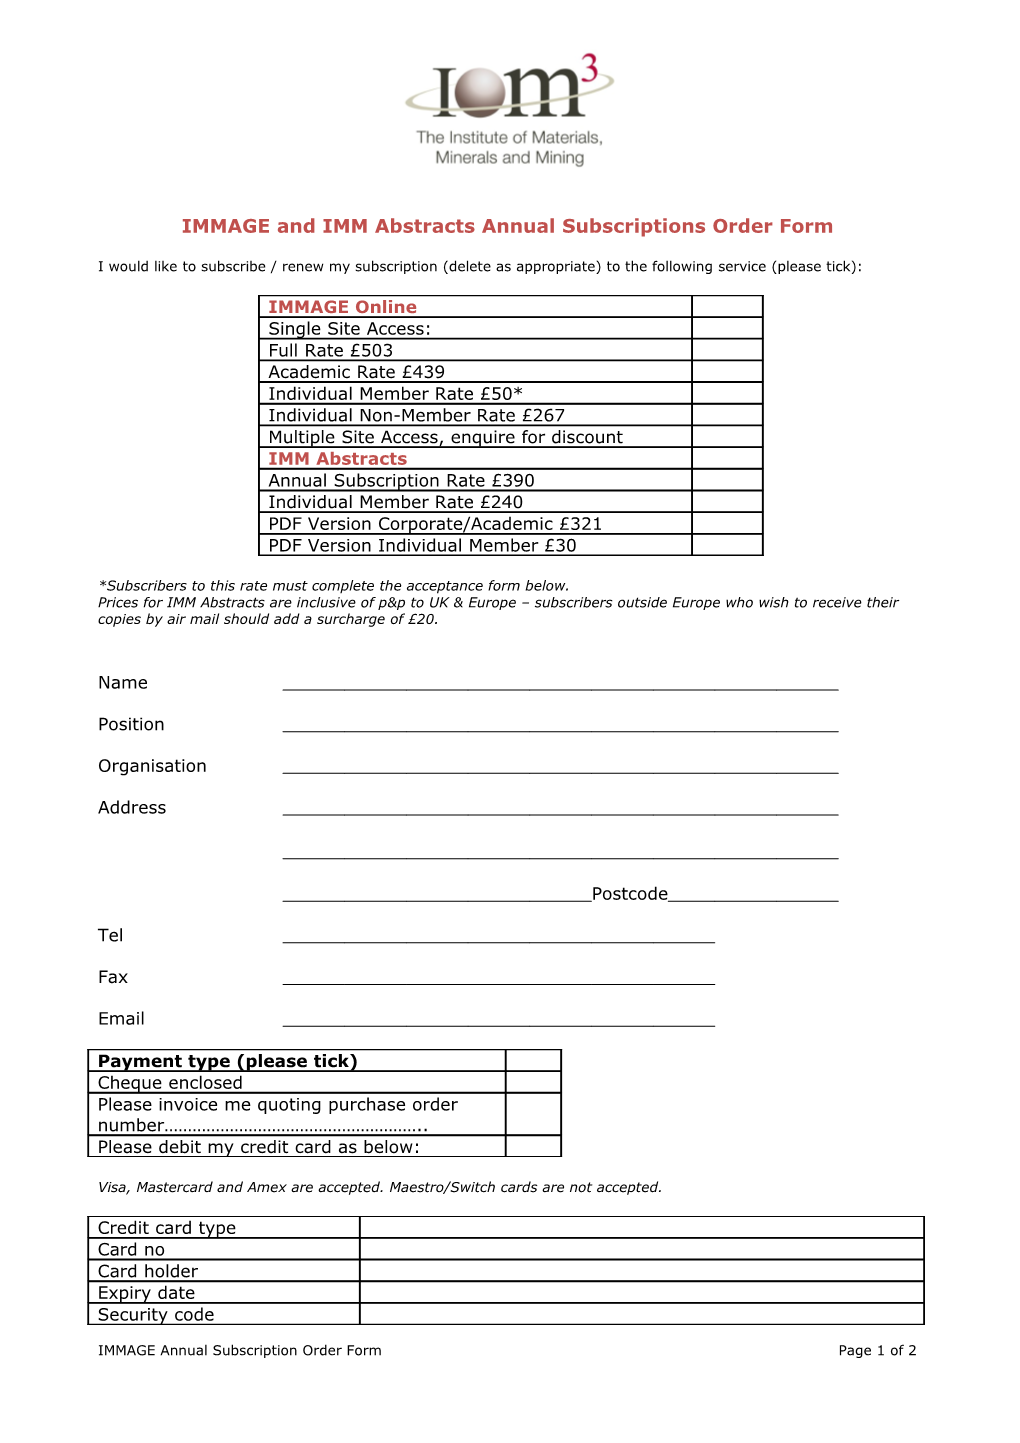 IMMAGE Annual Subscriptions Order Form